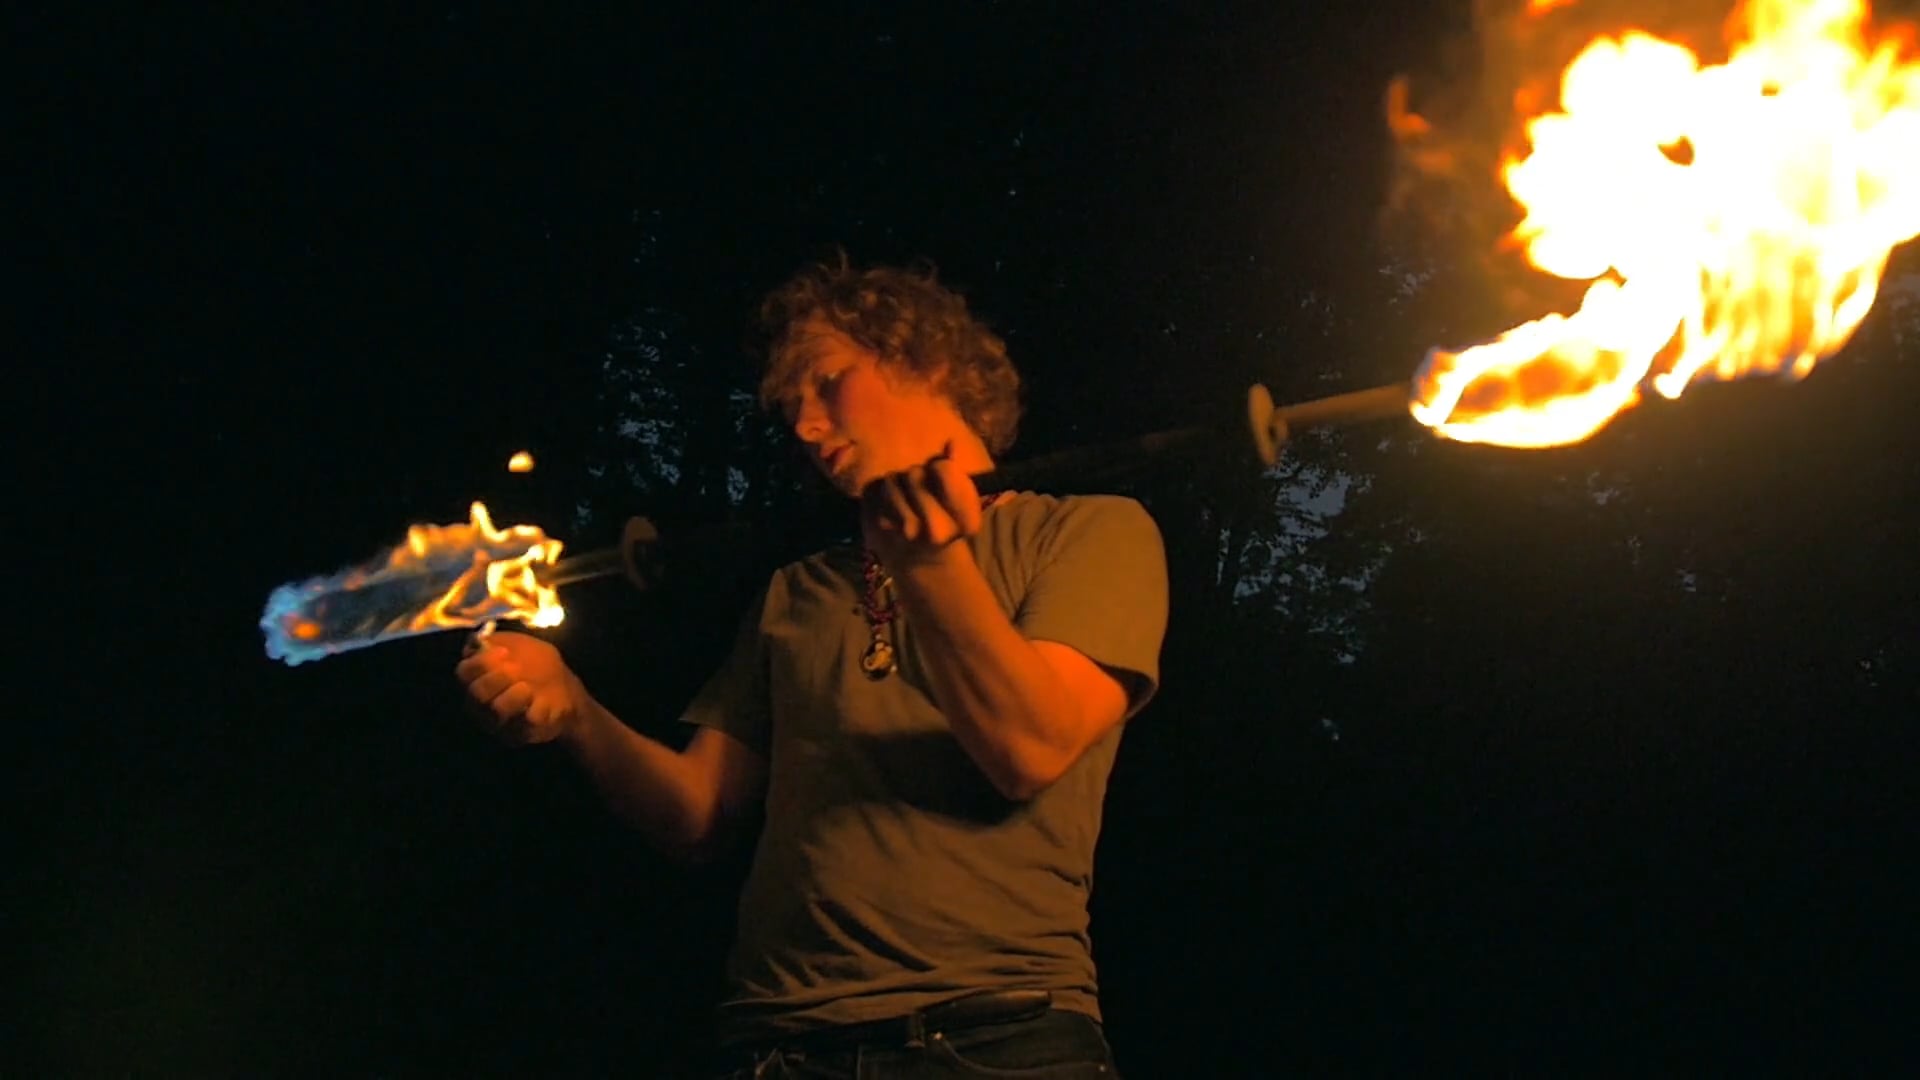 Promotional video thumbnail 1 for Austin Riggs Fire Performance